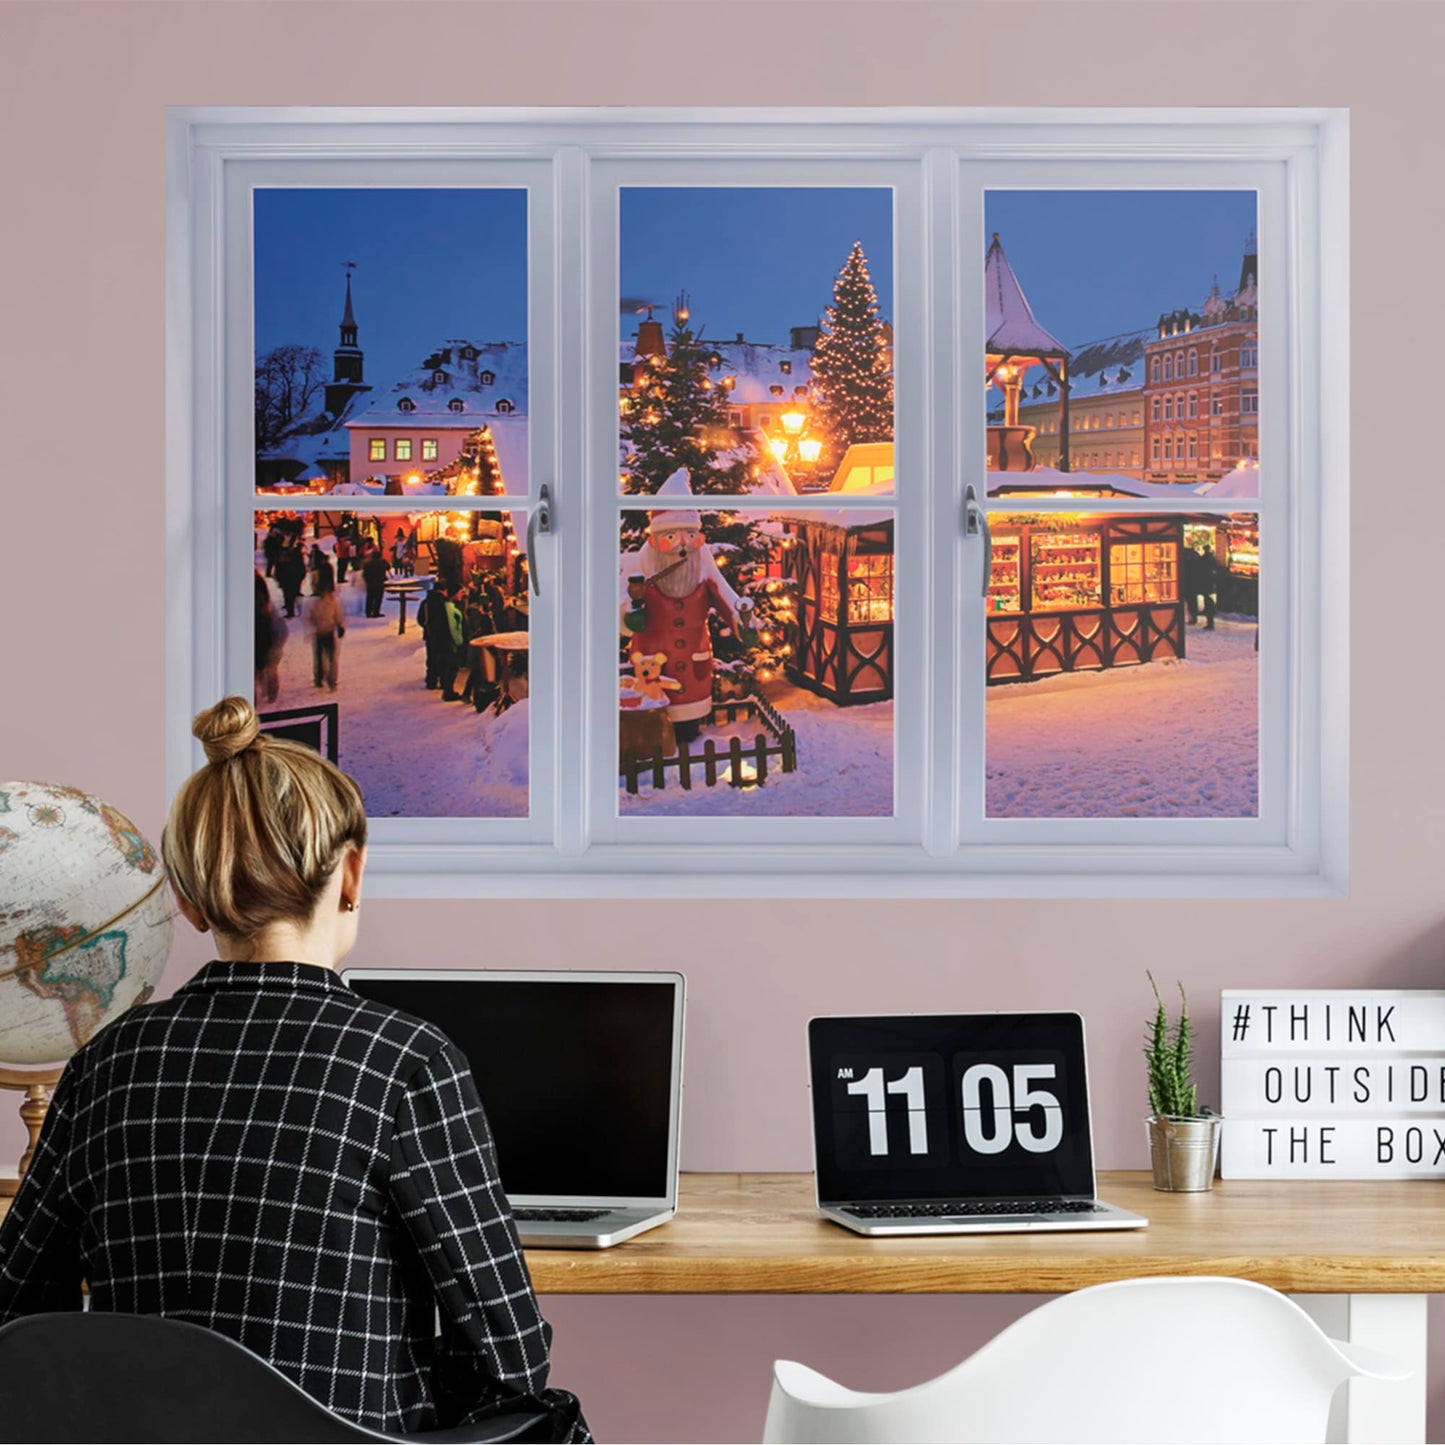 Instant Window: Christmas Market at Night - Removable Wall Graphic